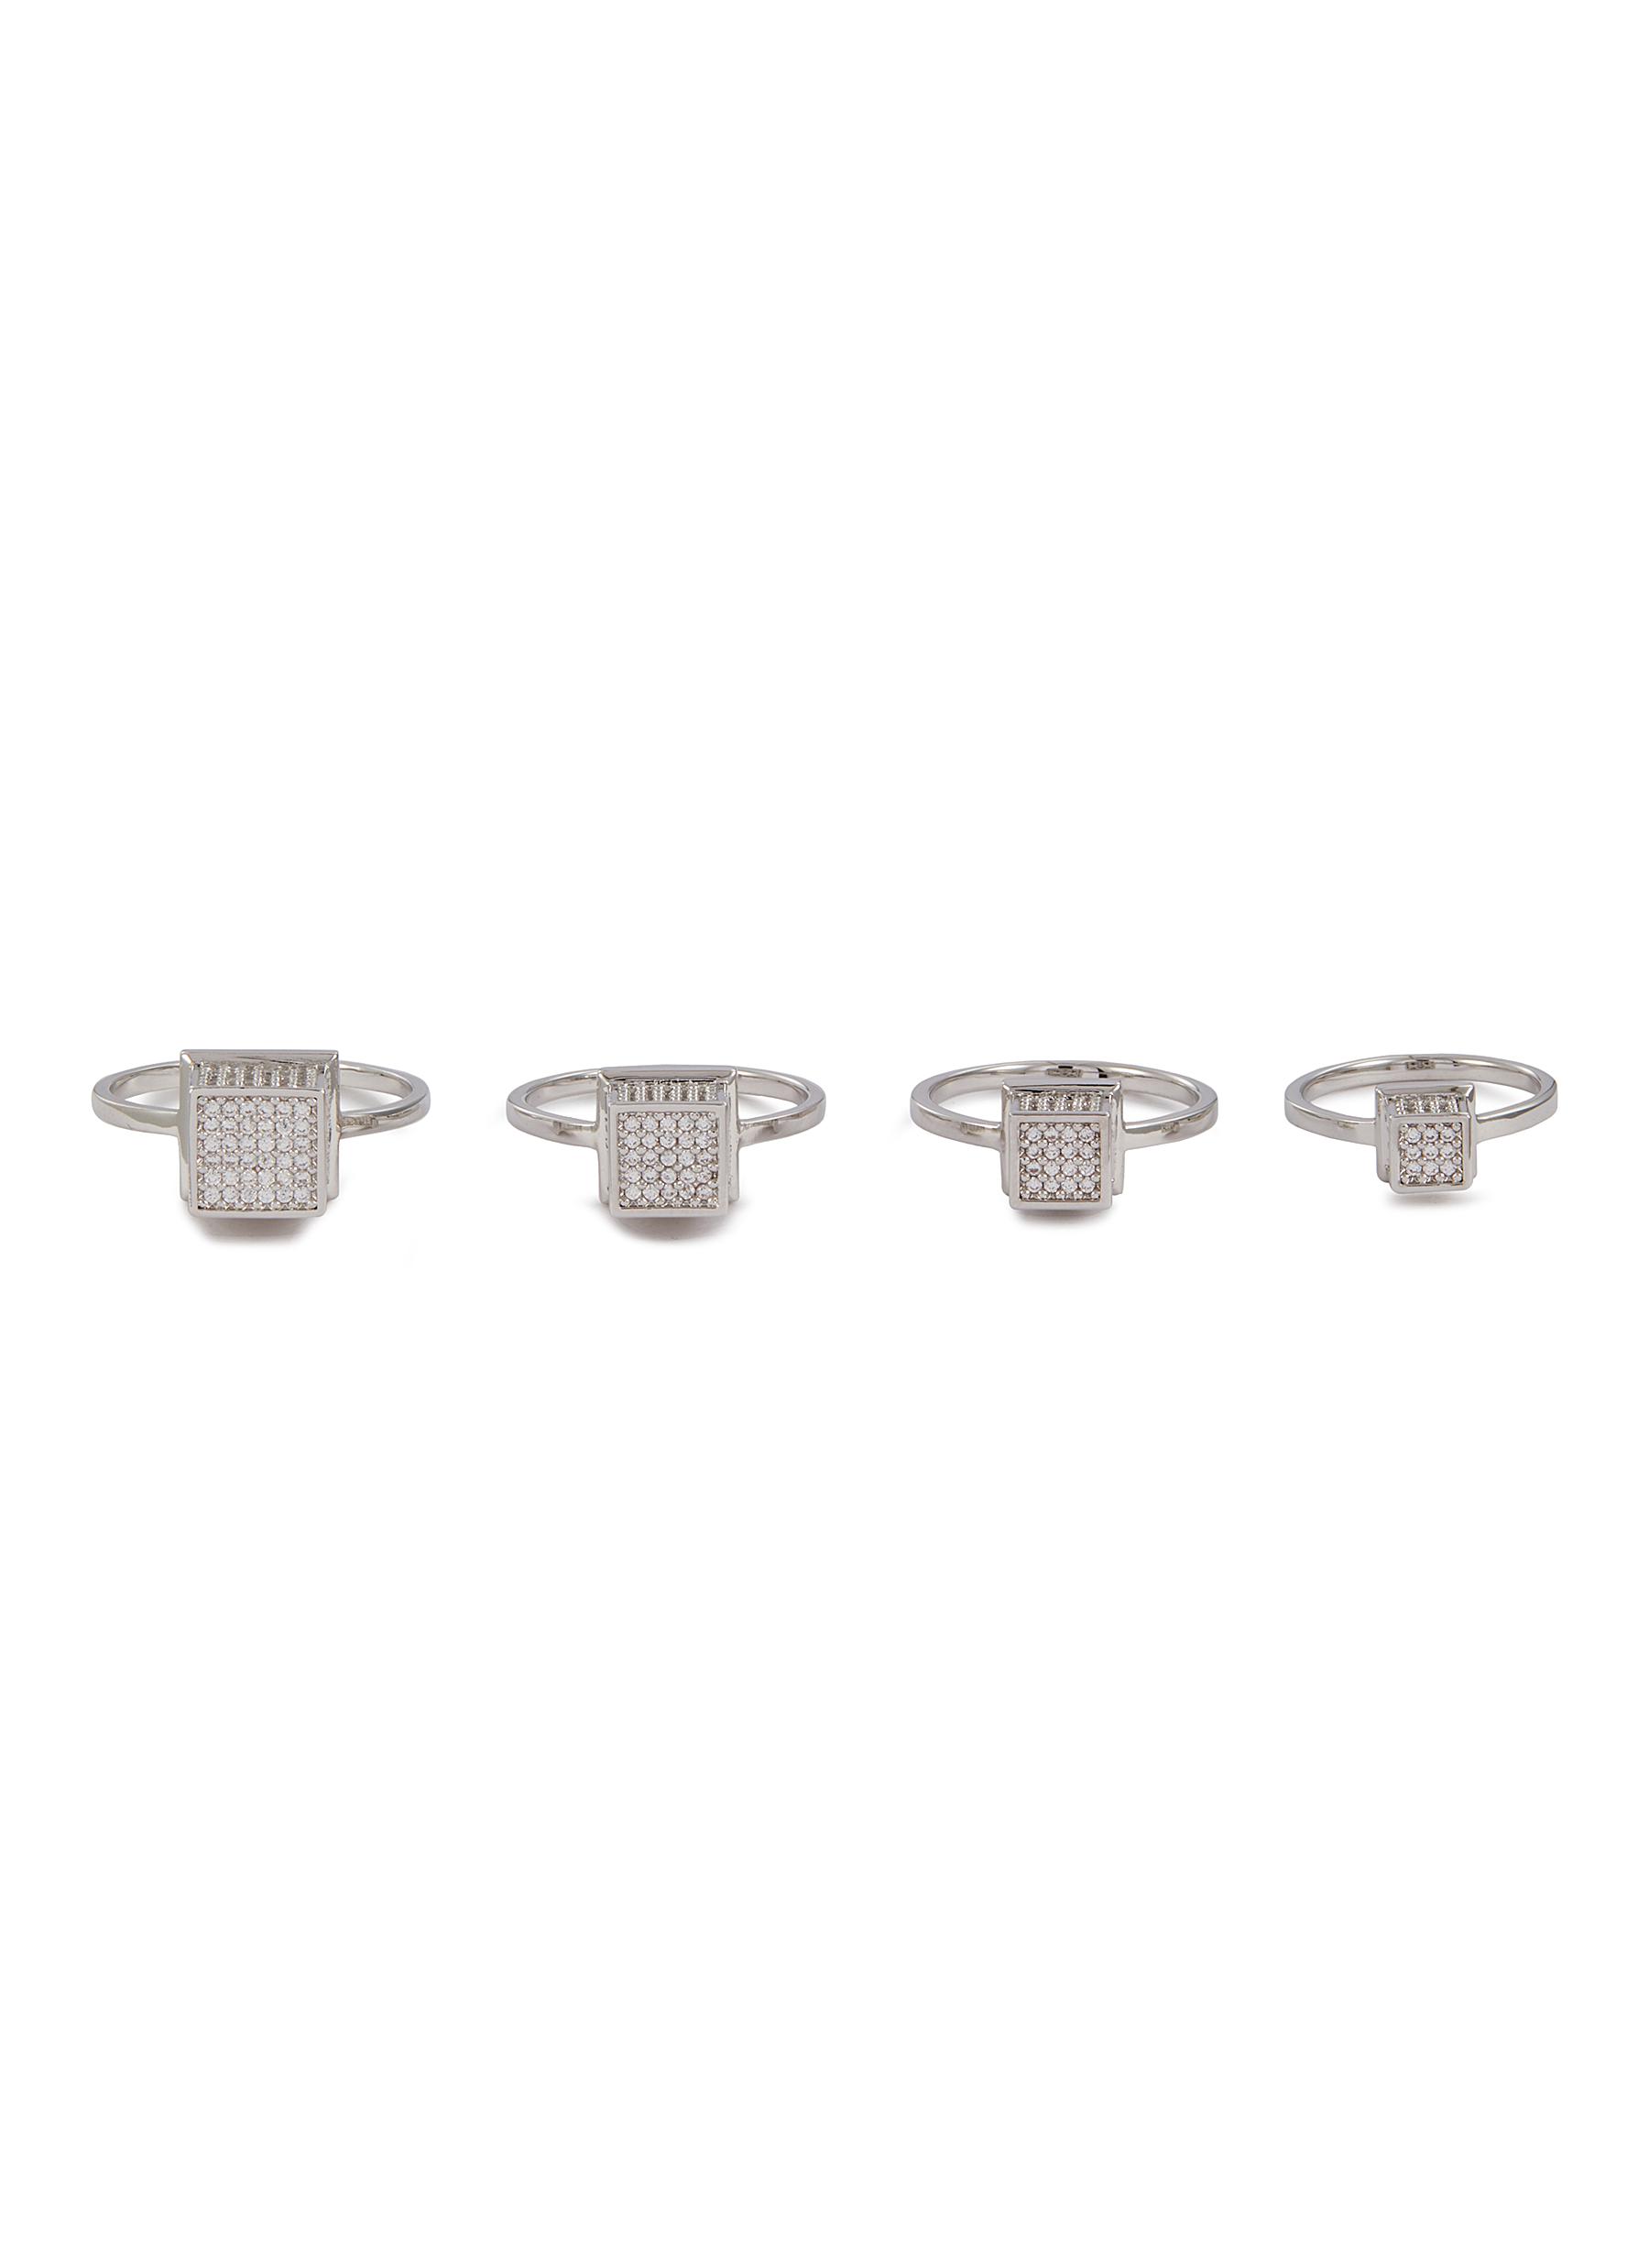 Graduated Cube Silver Toned Metal Ring Set